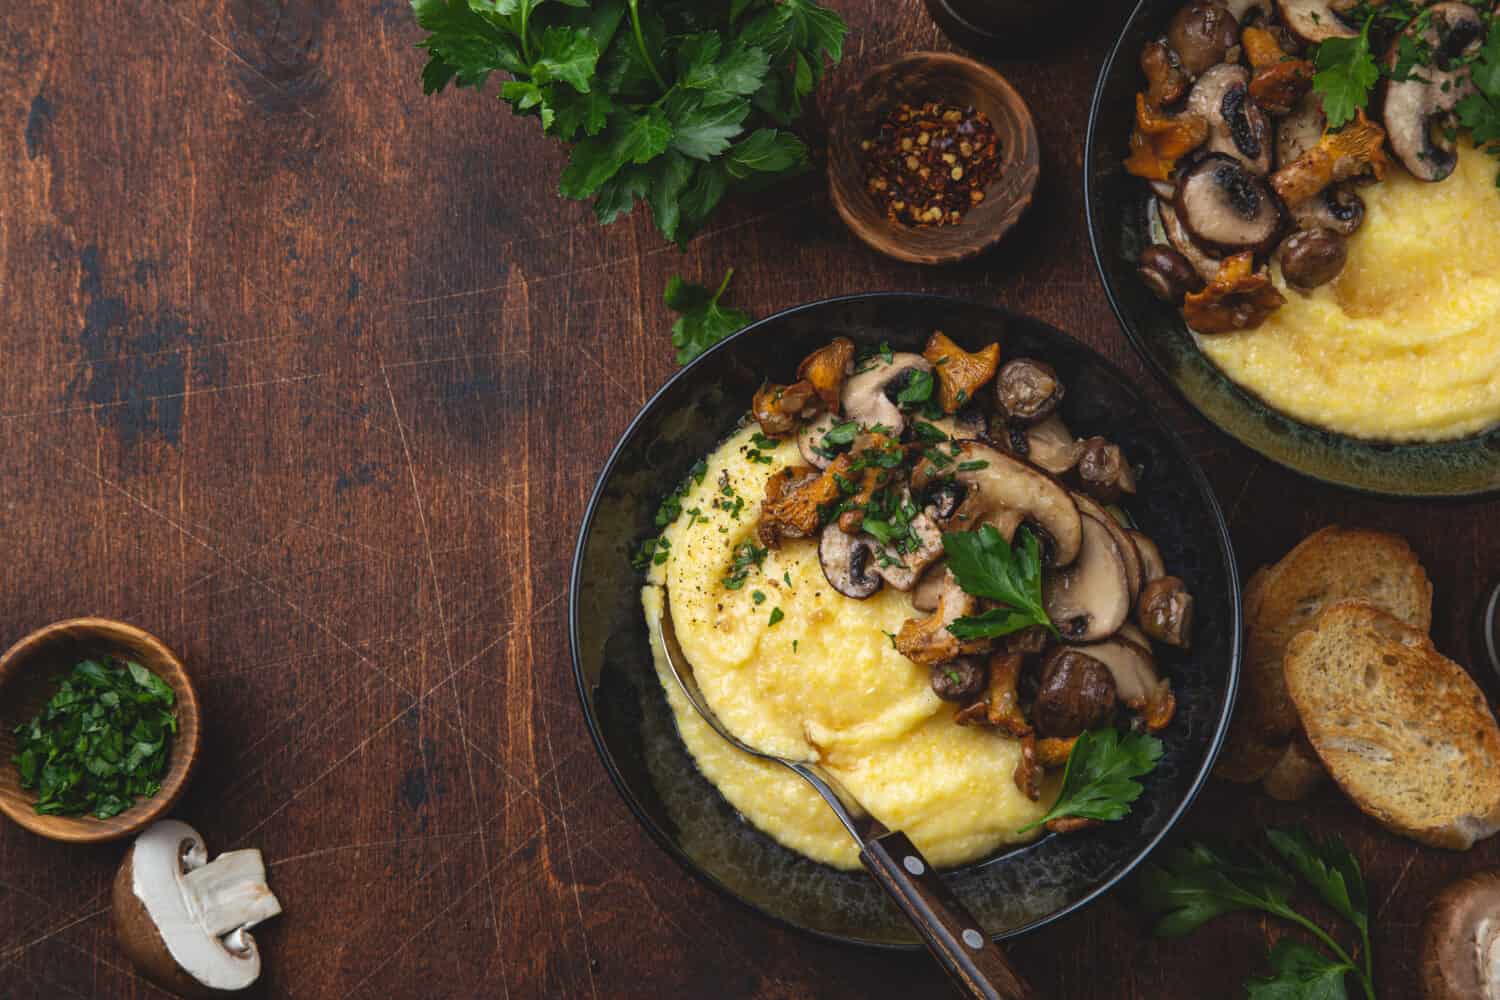 Creamy polenta with fried mushrooms, wooden background, top view, copy space